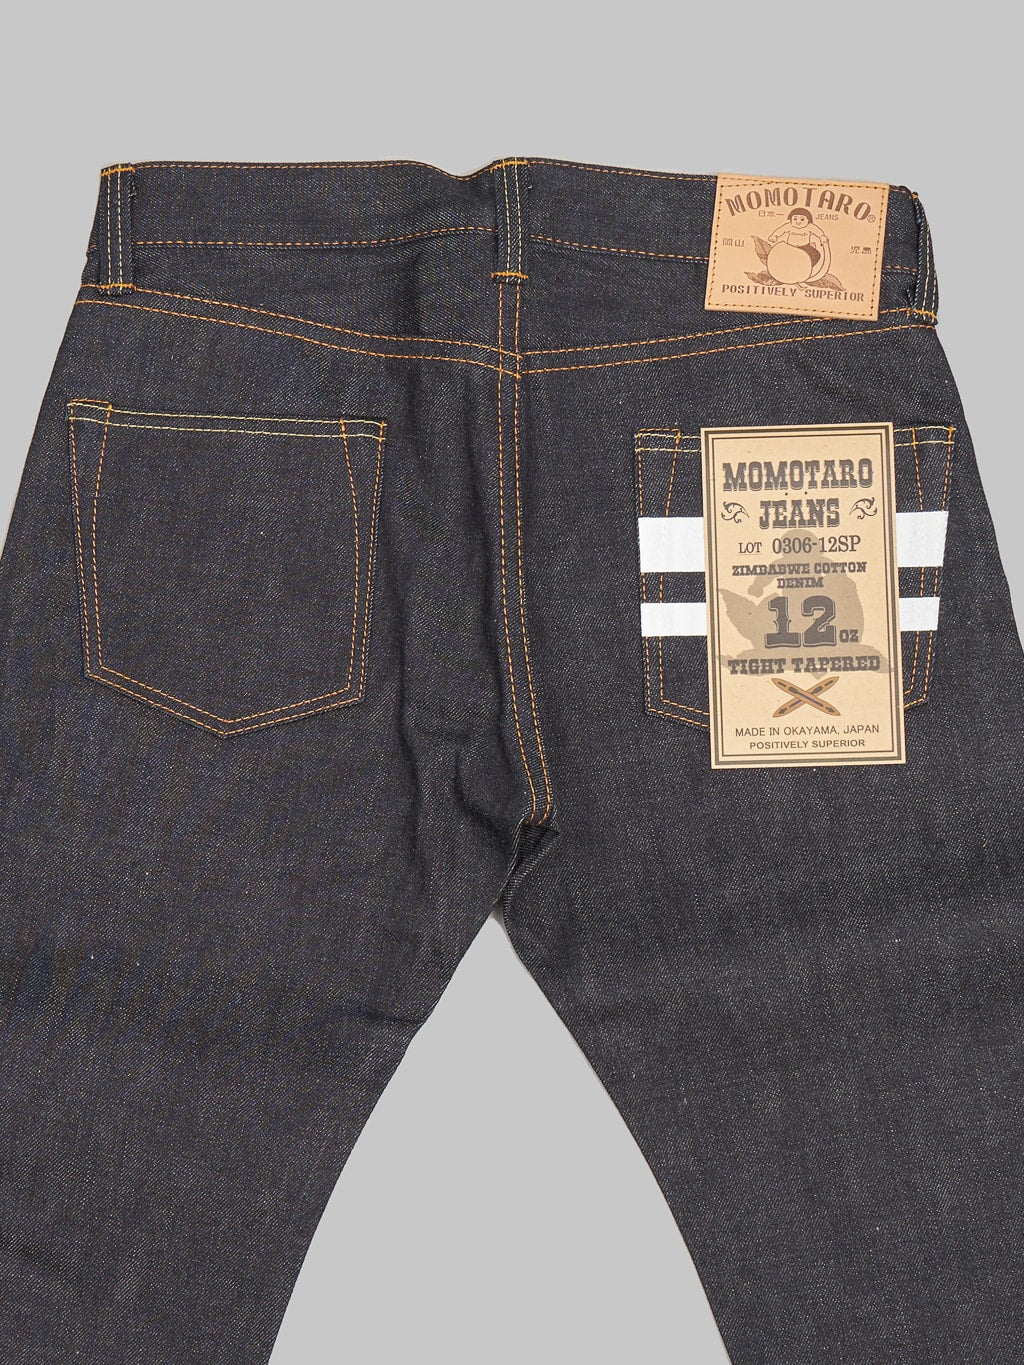 Momotaro 0306 12SP Going To Battle 12oz Tight Tapered Jeans back details